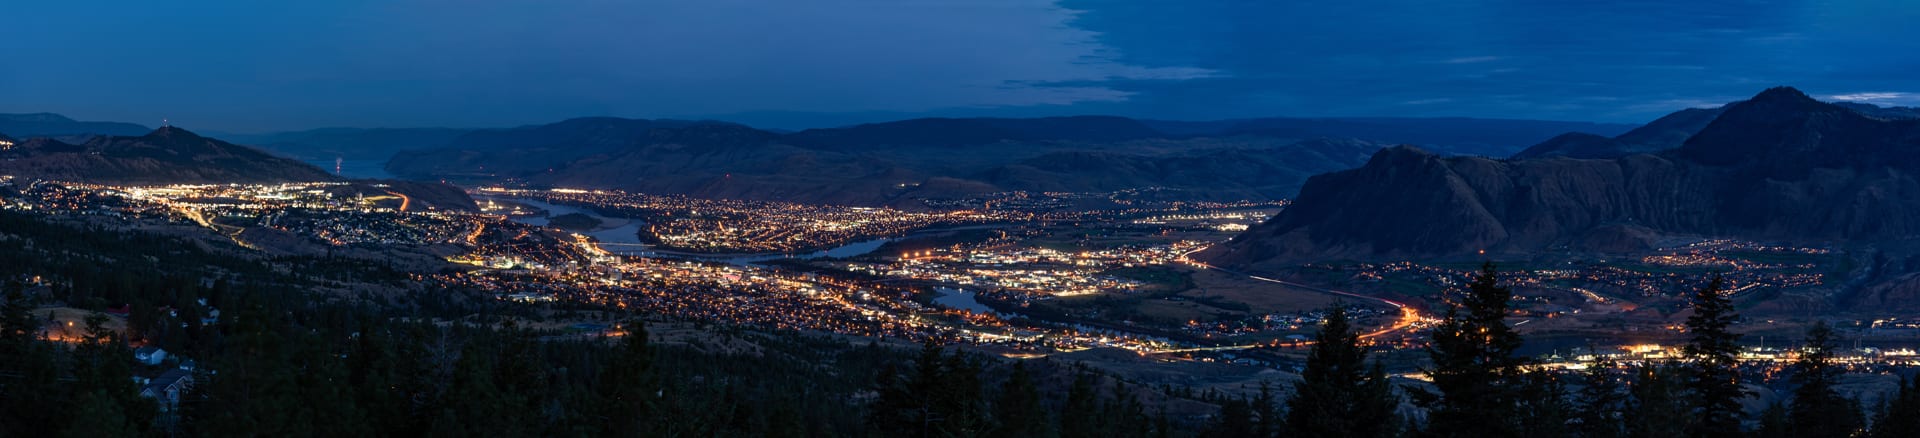 Kamloops City Aerial wide-angle view of mountains and city with lights